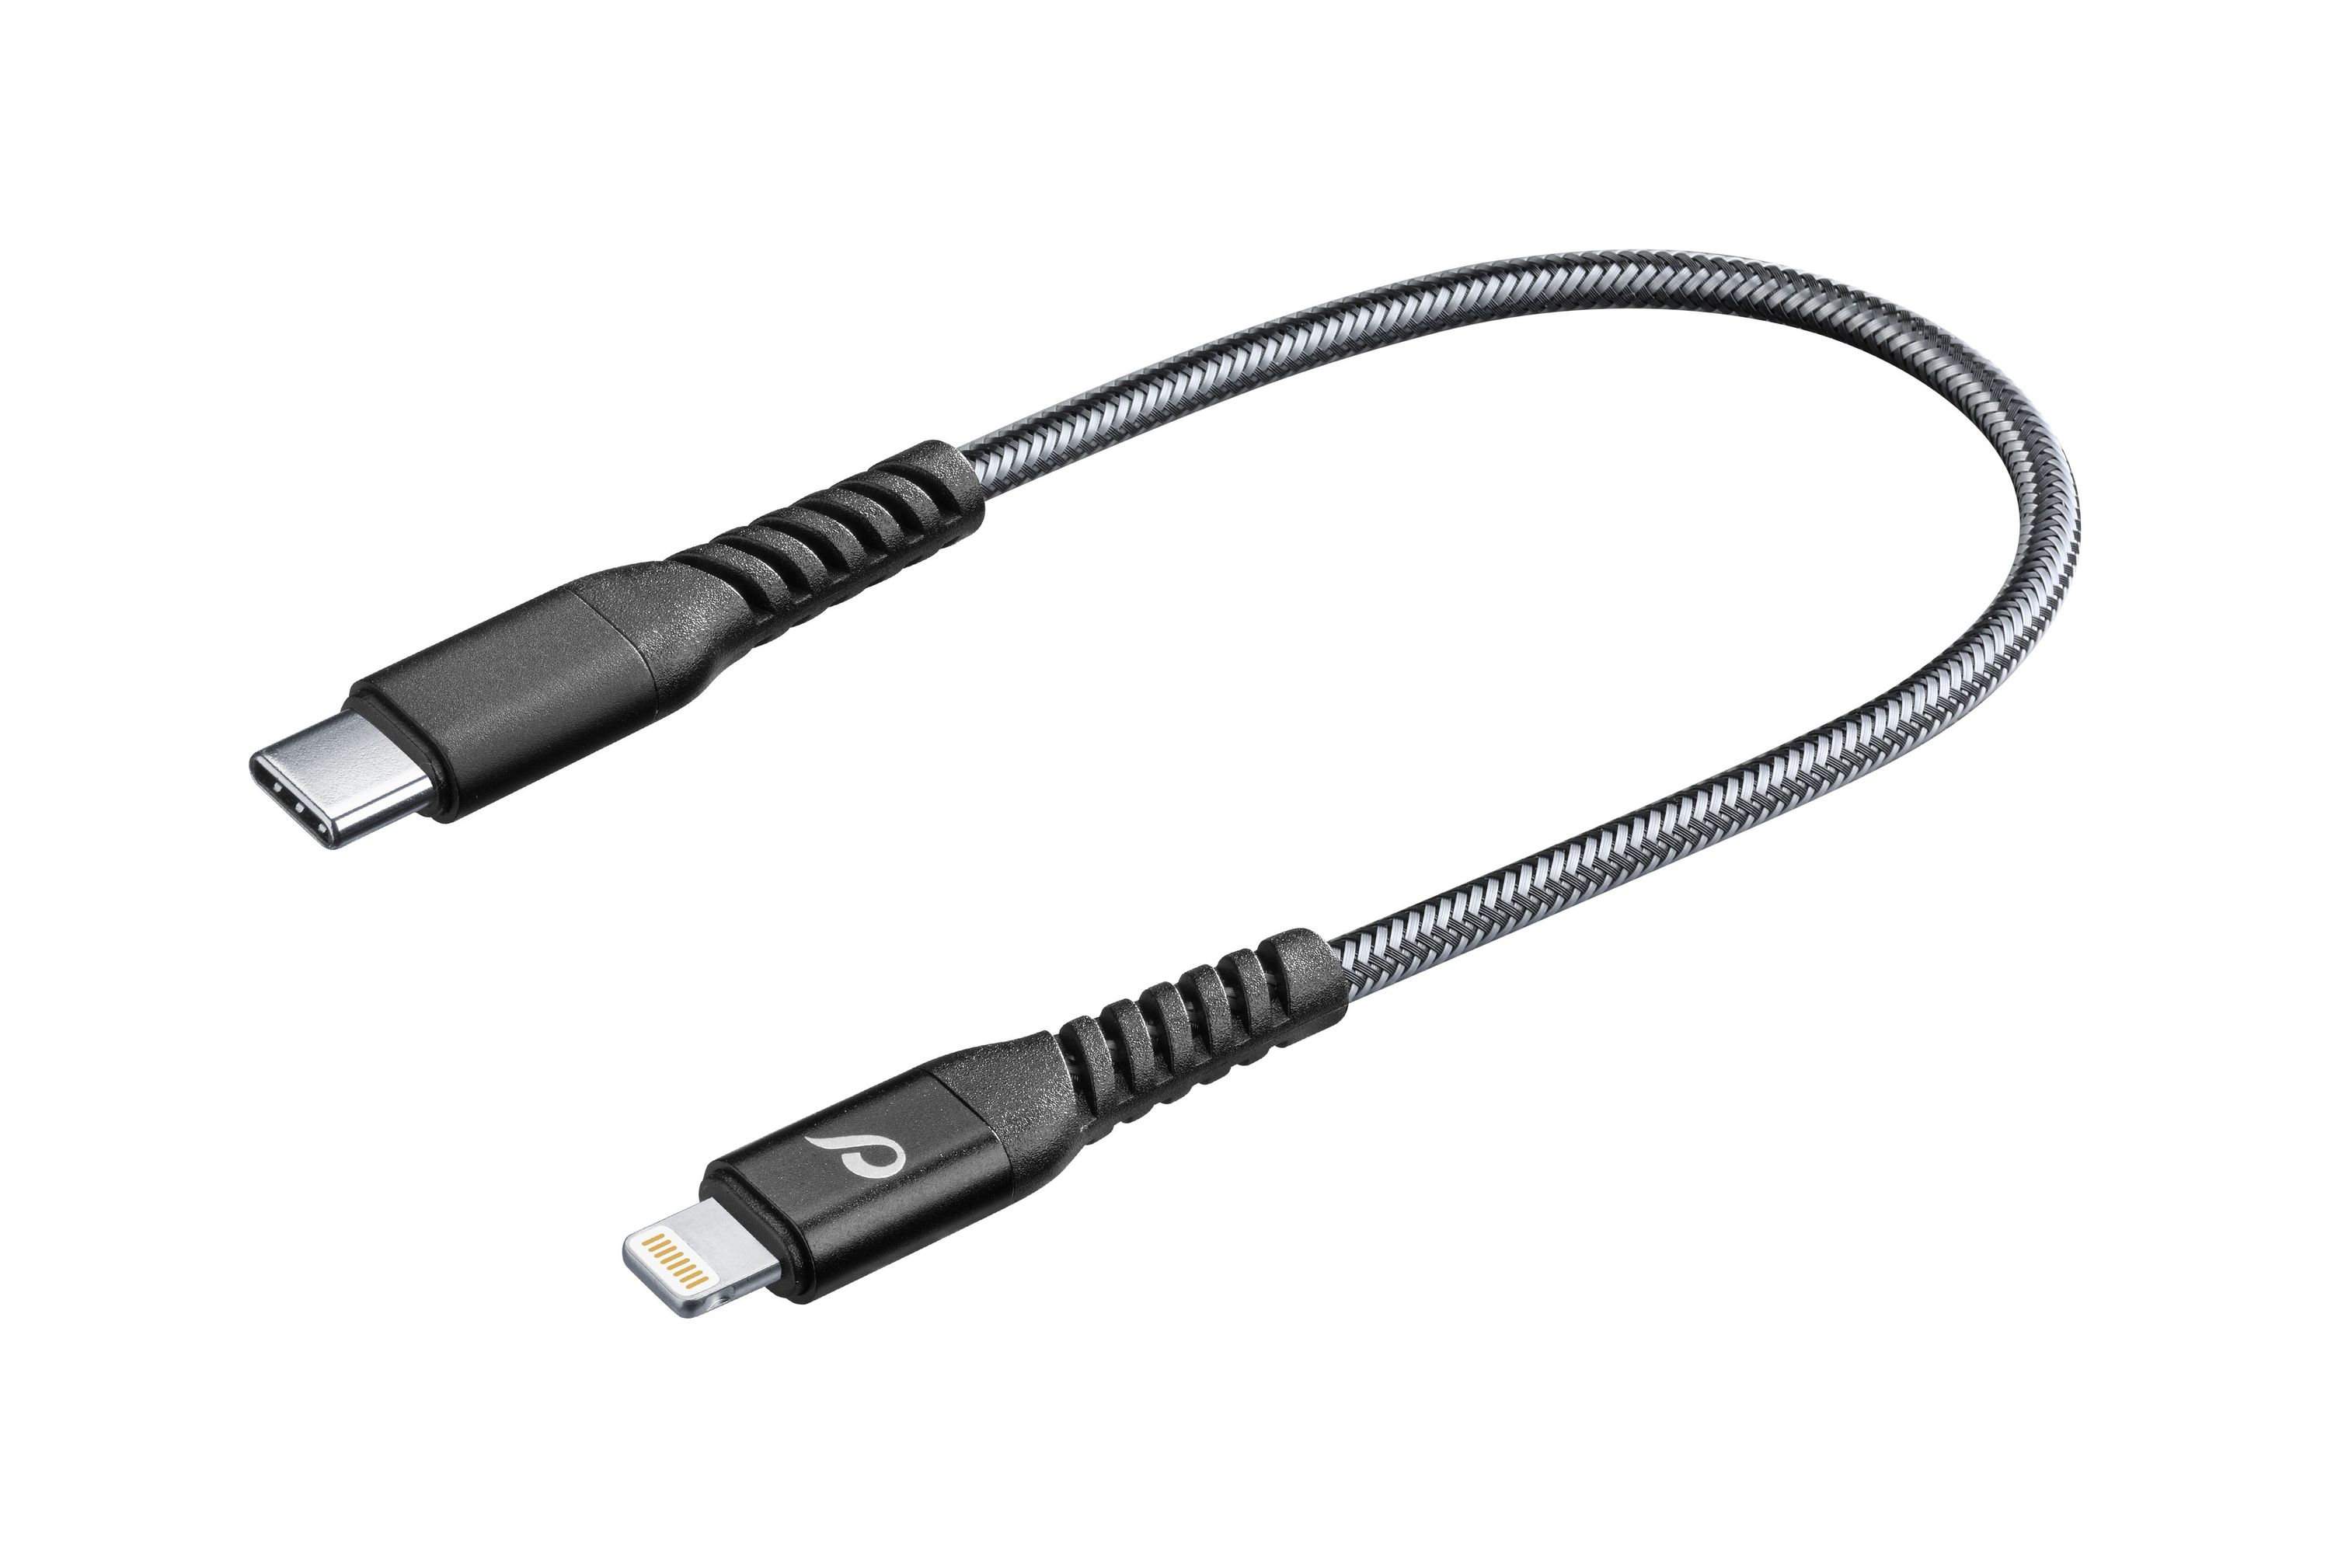 Cable Lightning a USB-A (15 cm, negro)